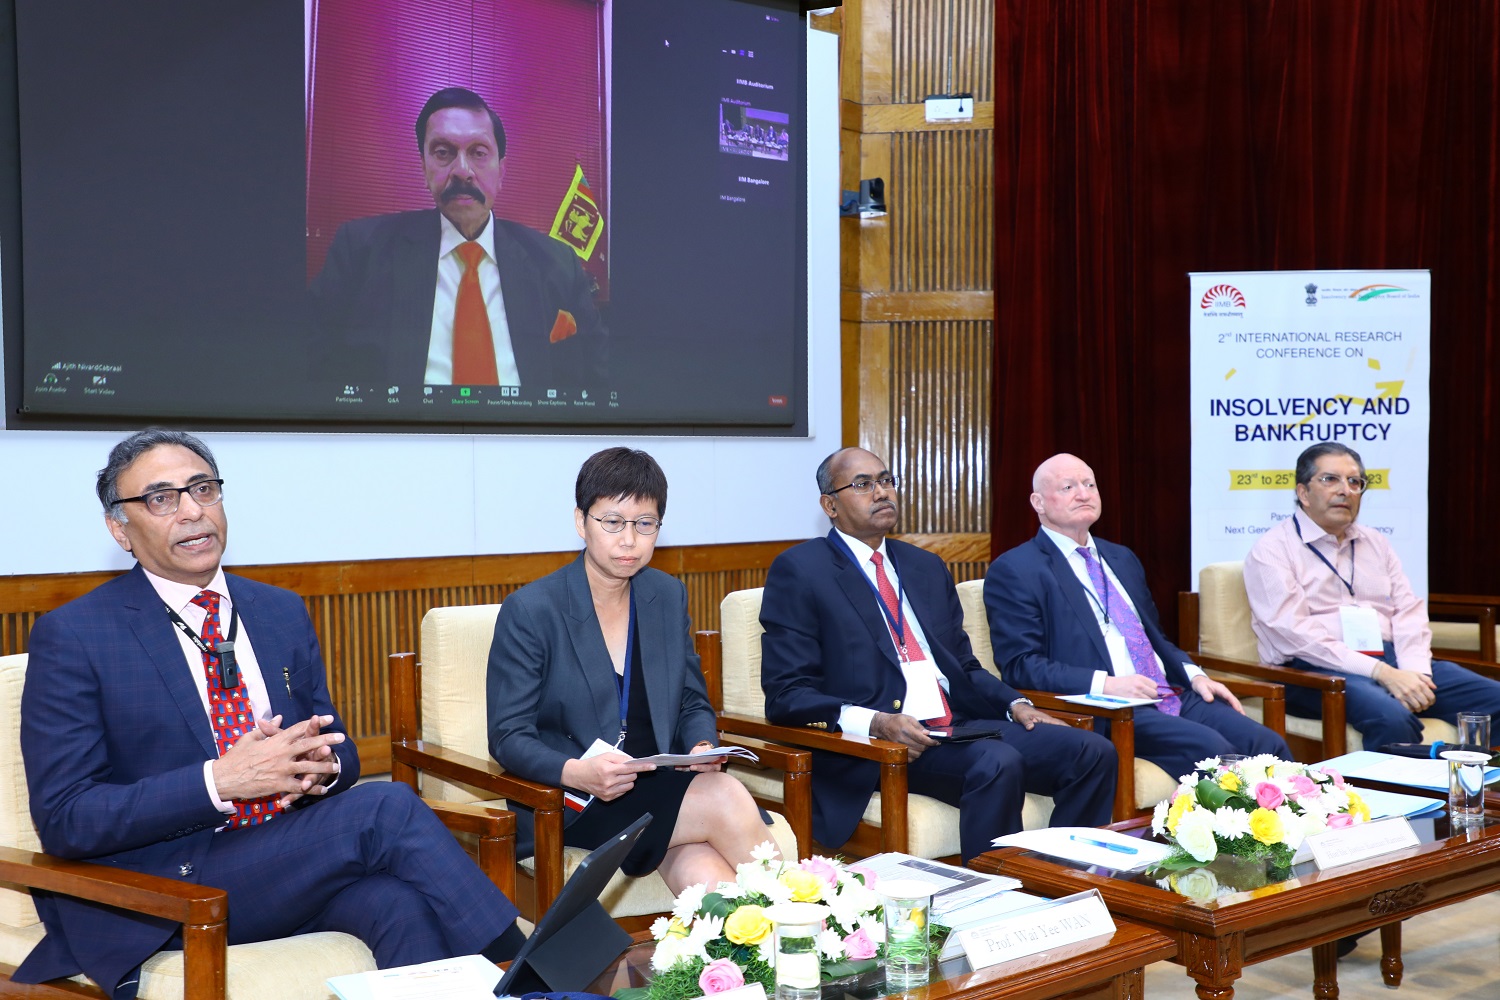 (L-R): Sumant Batra, Founder, Insolvency Law Academy; Prof. Wai Yee Wan, Associate Dean (Research and Internationalisation) and Professor, School of Law, City University of Hong Kong; Hon’ble Justice Kannan Ramesh, Judge, Appellate Division, Supreme Court of Singapore and Judge, Singapore International Commercial Court; James H.M. Sprayregen, Founder, Kirkland & Ellis’ Worldwide Restructuring Group, Chicago, USA, and Bahram N Vakil, Founding Partner, AZB & Partners, feature in the panel on ‘Next Generation Reforms in Indian Insolvency Regime’. Ajith Nivard Cabraal, Former Governor, Central Bank of Sri Lanka, joined the discussion online.